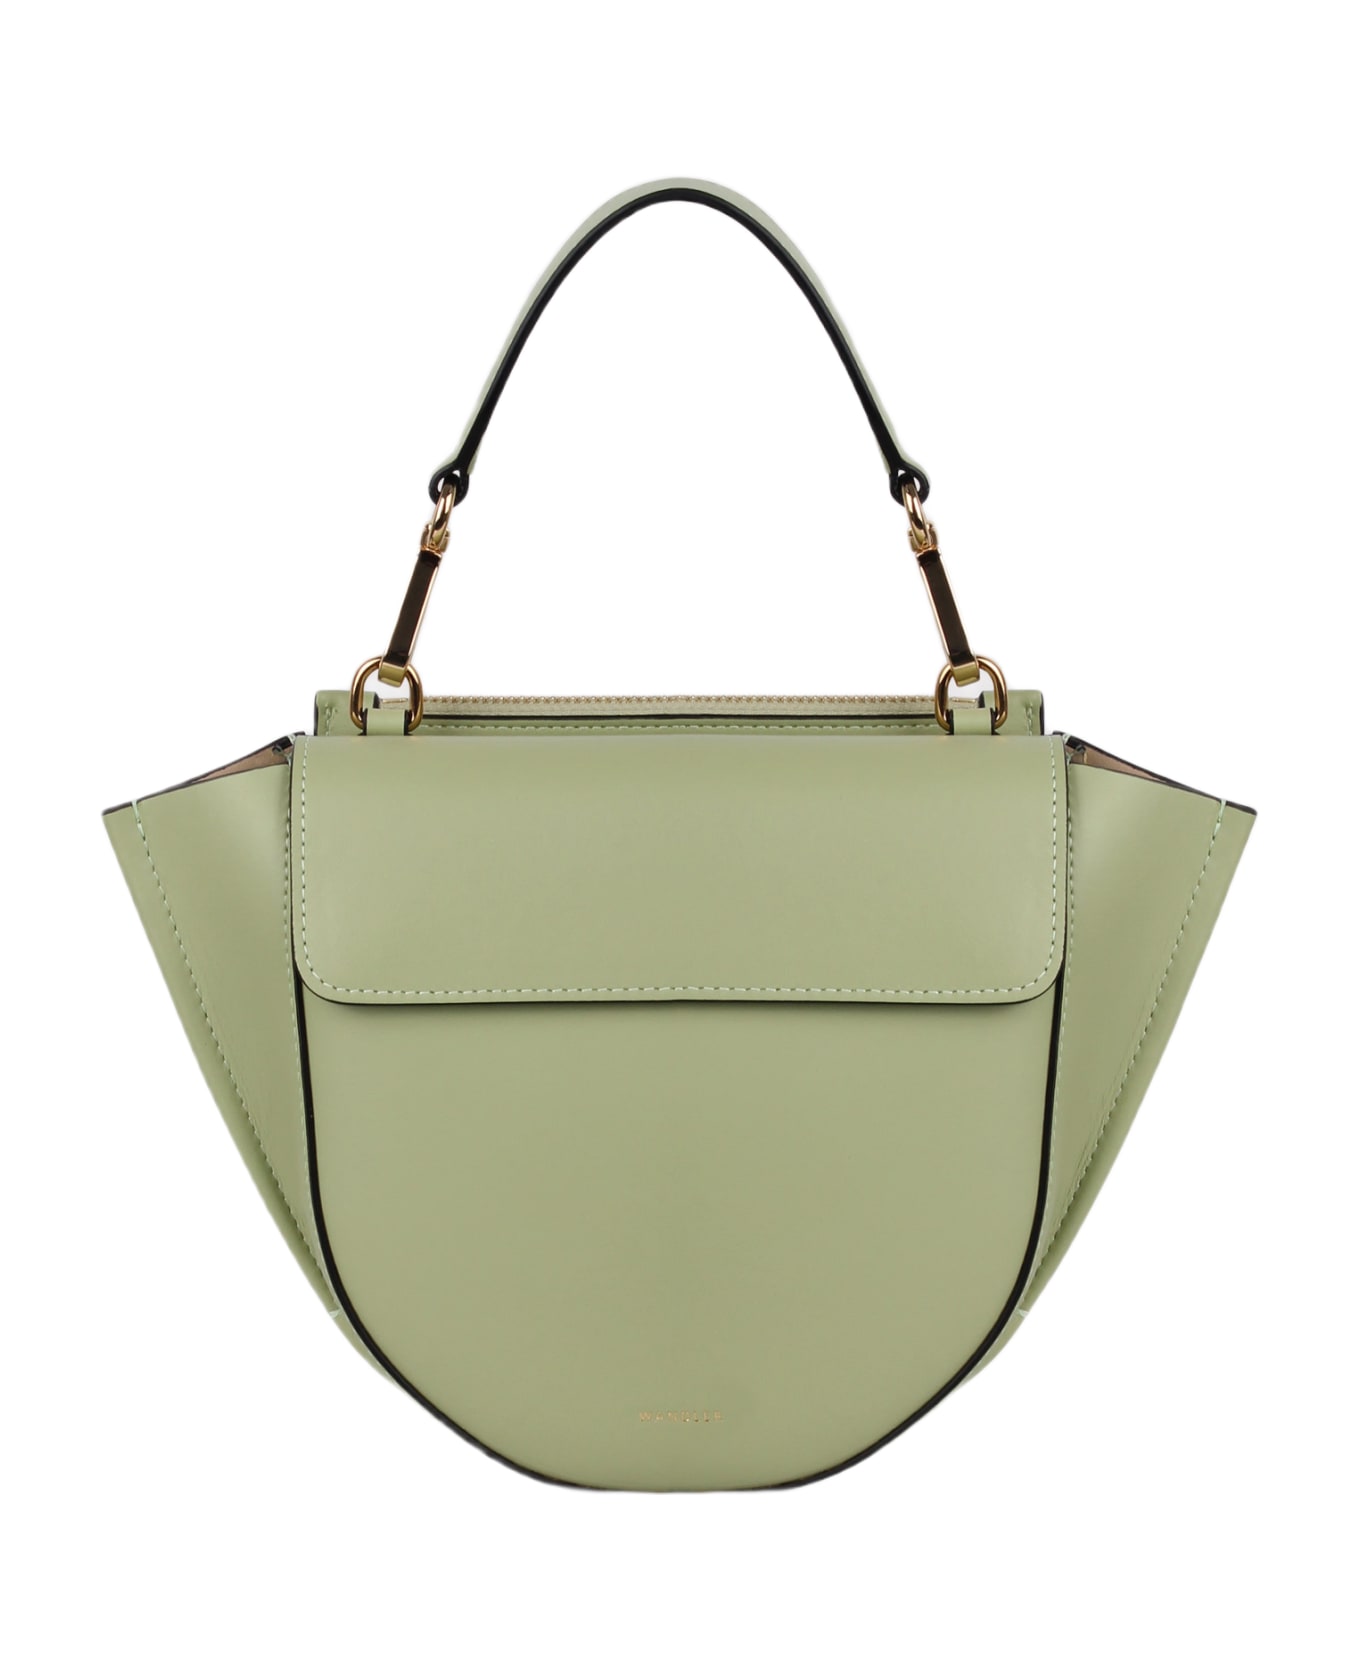 Wandler Small Hortensia Leather Bag